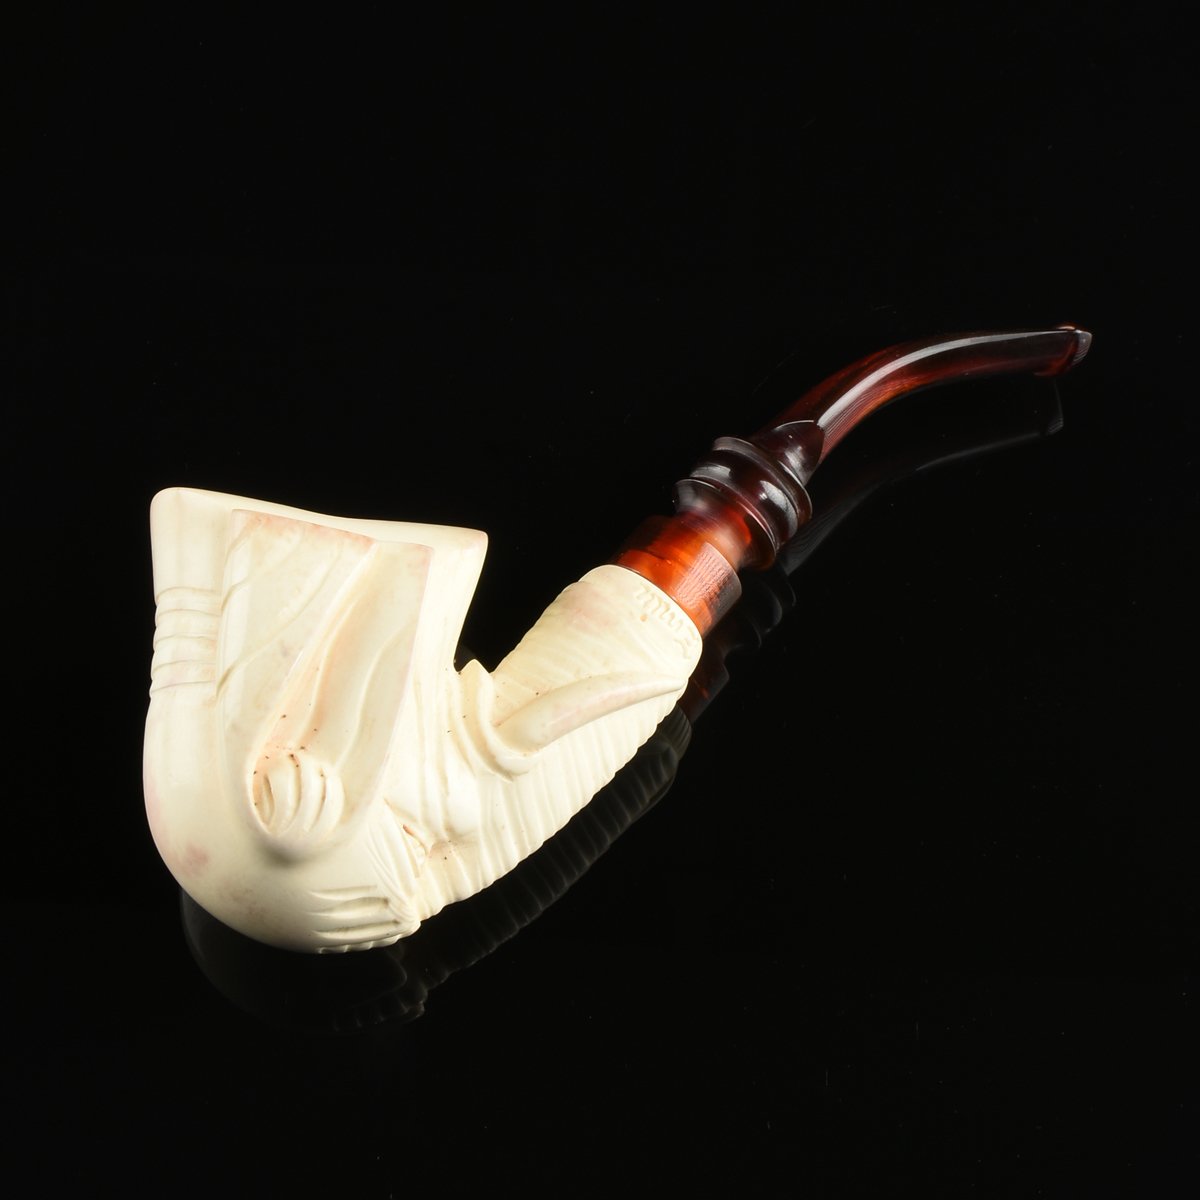 A GROUP OF THREE MEERSCHAUM TOBACCO PIPES, LATE 19TH/EARLY 20TH CENTURY, carved in the form of a - Image 6 of 9